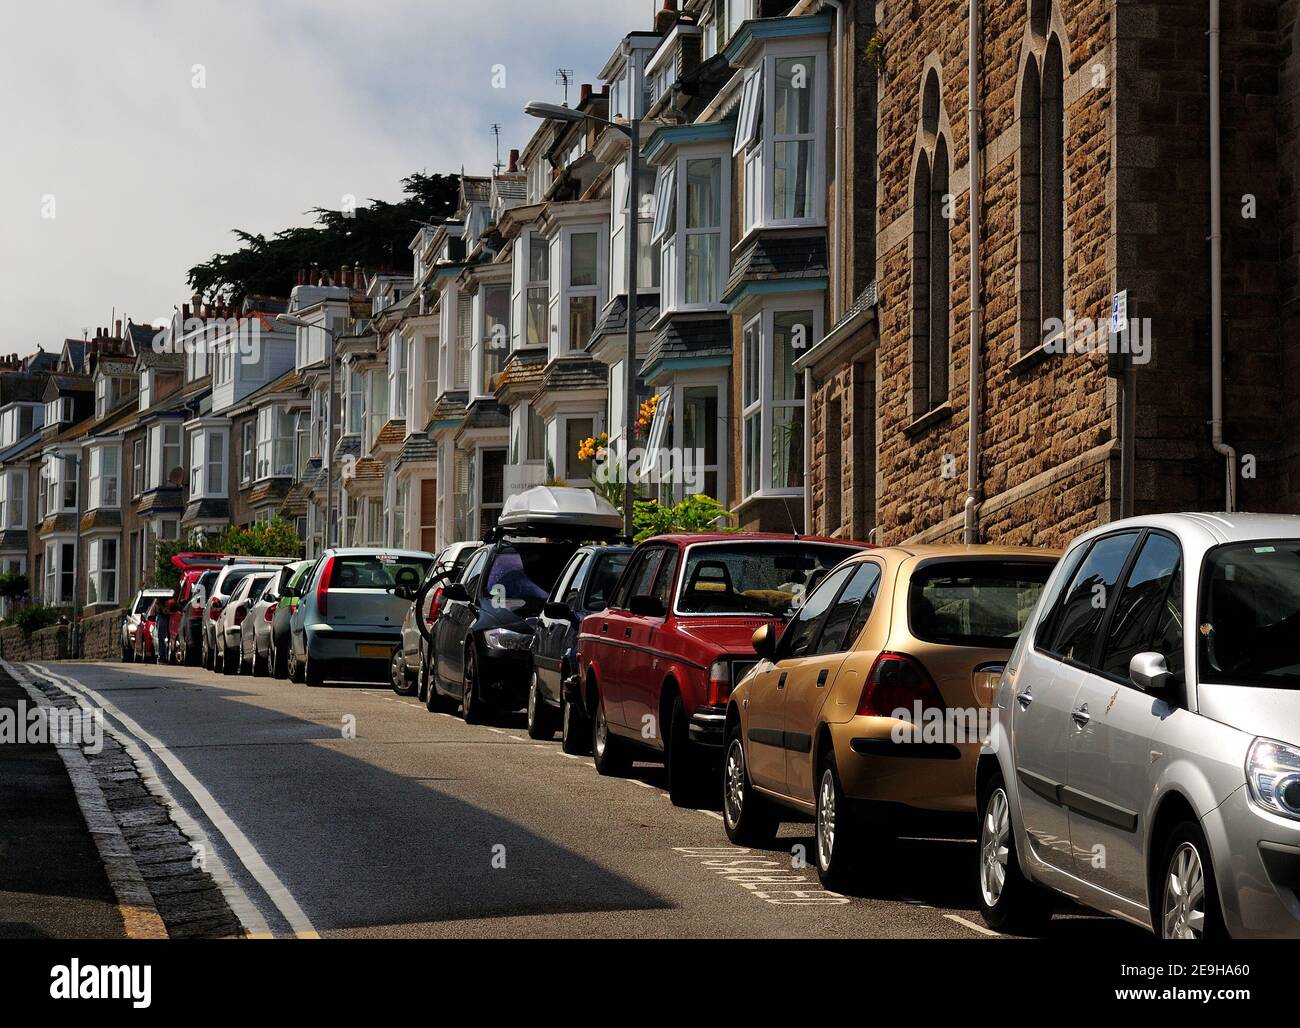 Cars Parking In Front Of Charming Row Houses At Bedford Road St Ives Cornwall England On A Sunny Summer Day With A Few Clouds In The Sky Stock Photo